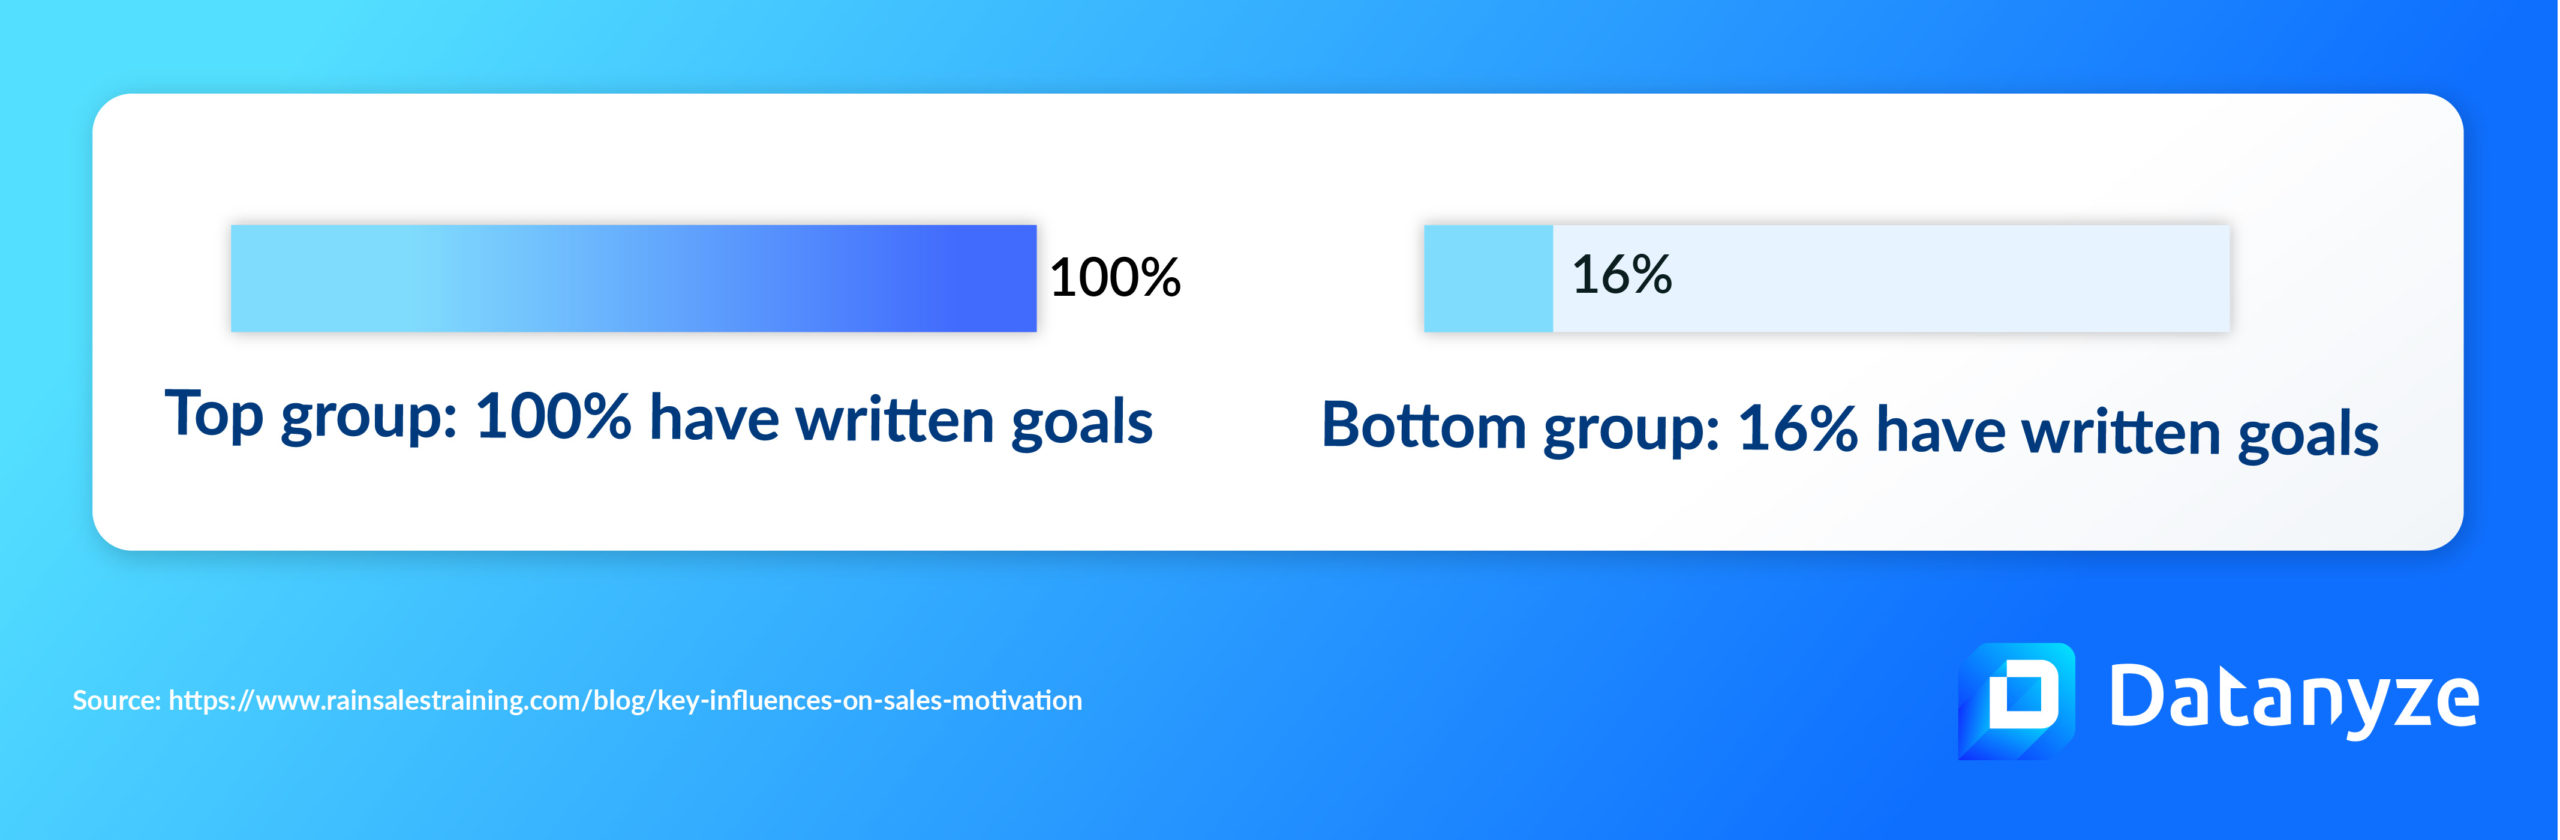 Infographic with two bars showing percentage of sellers with written goals – 100% of top group, 16% of bottom group